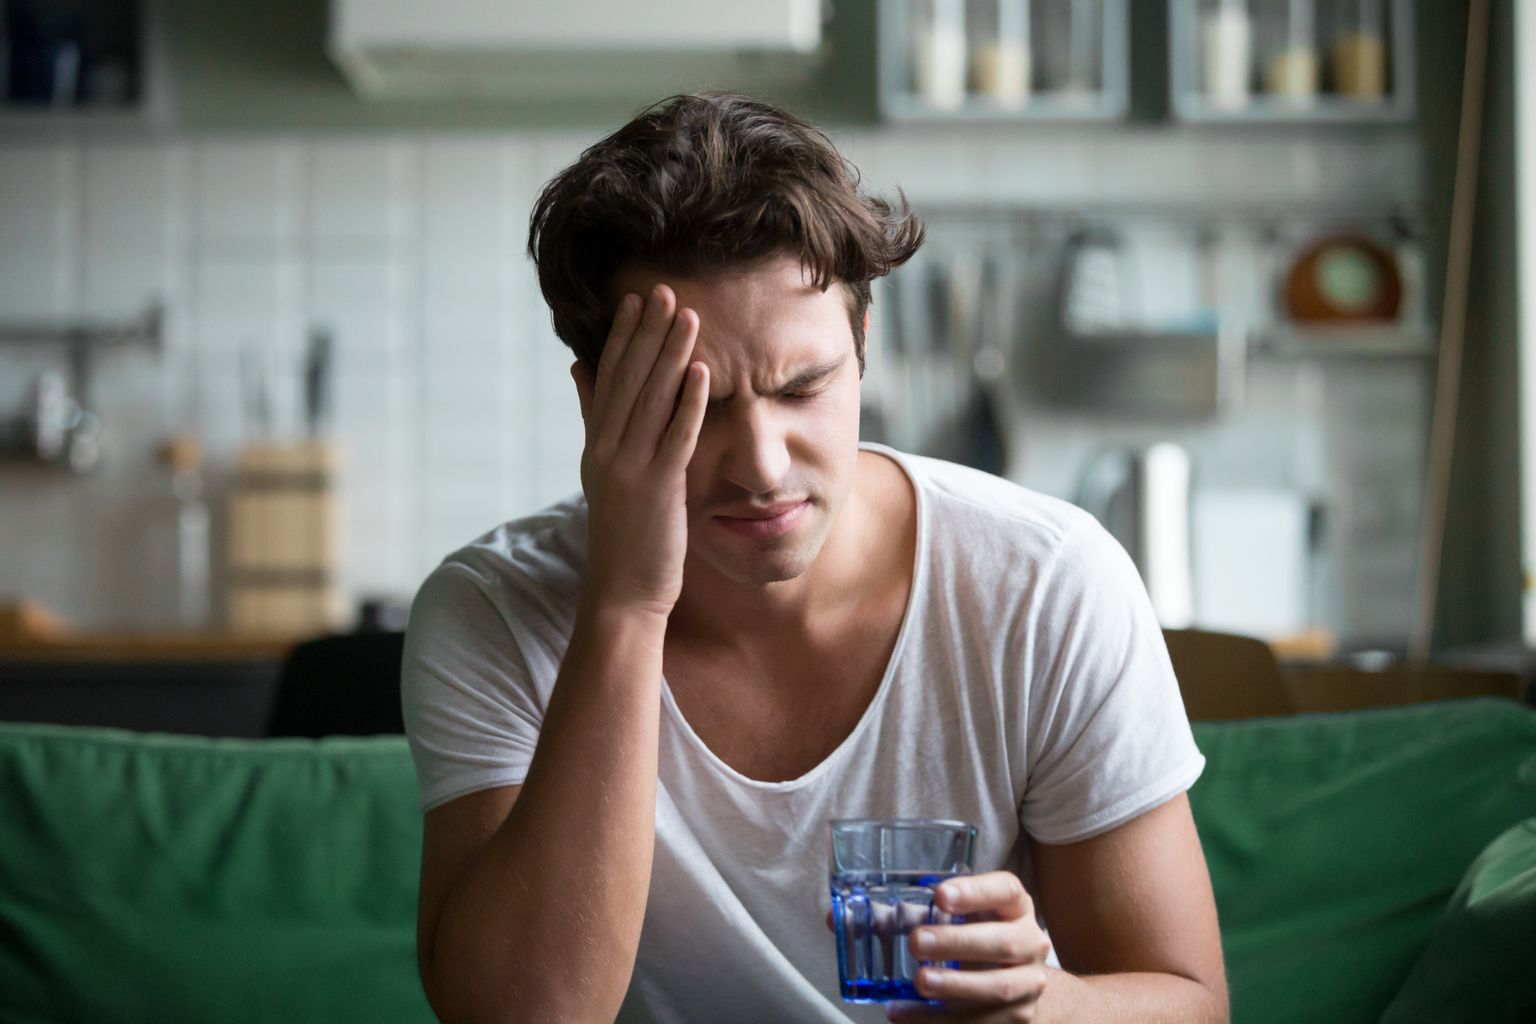 Shot of young man with headache and a glass of water in his hand